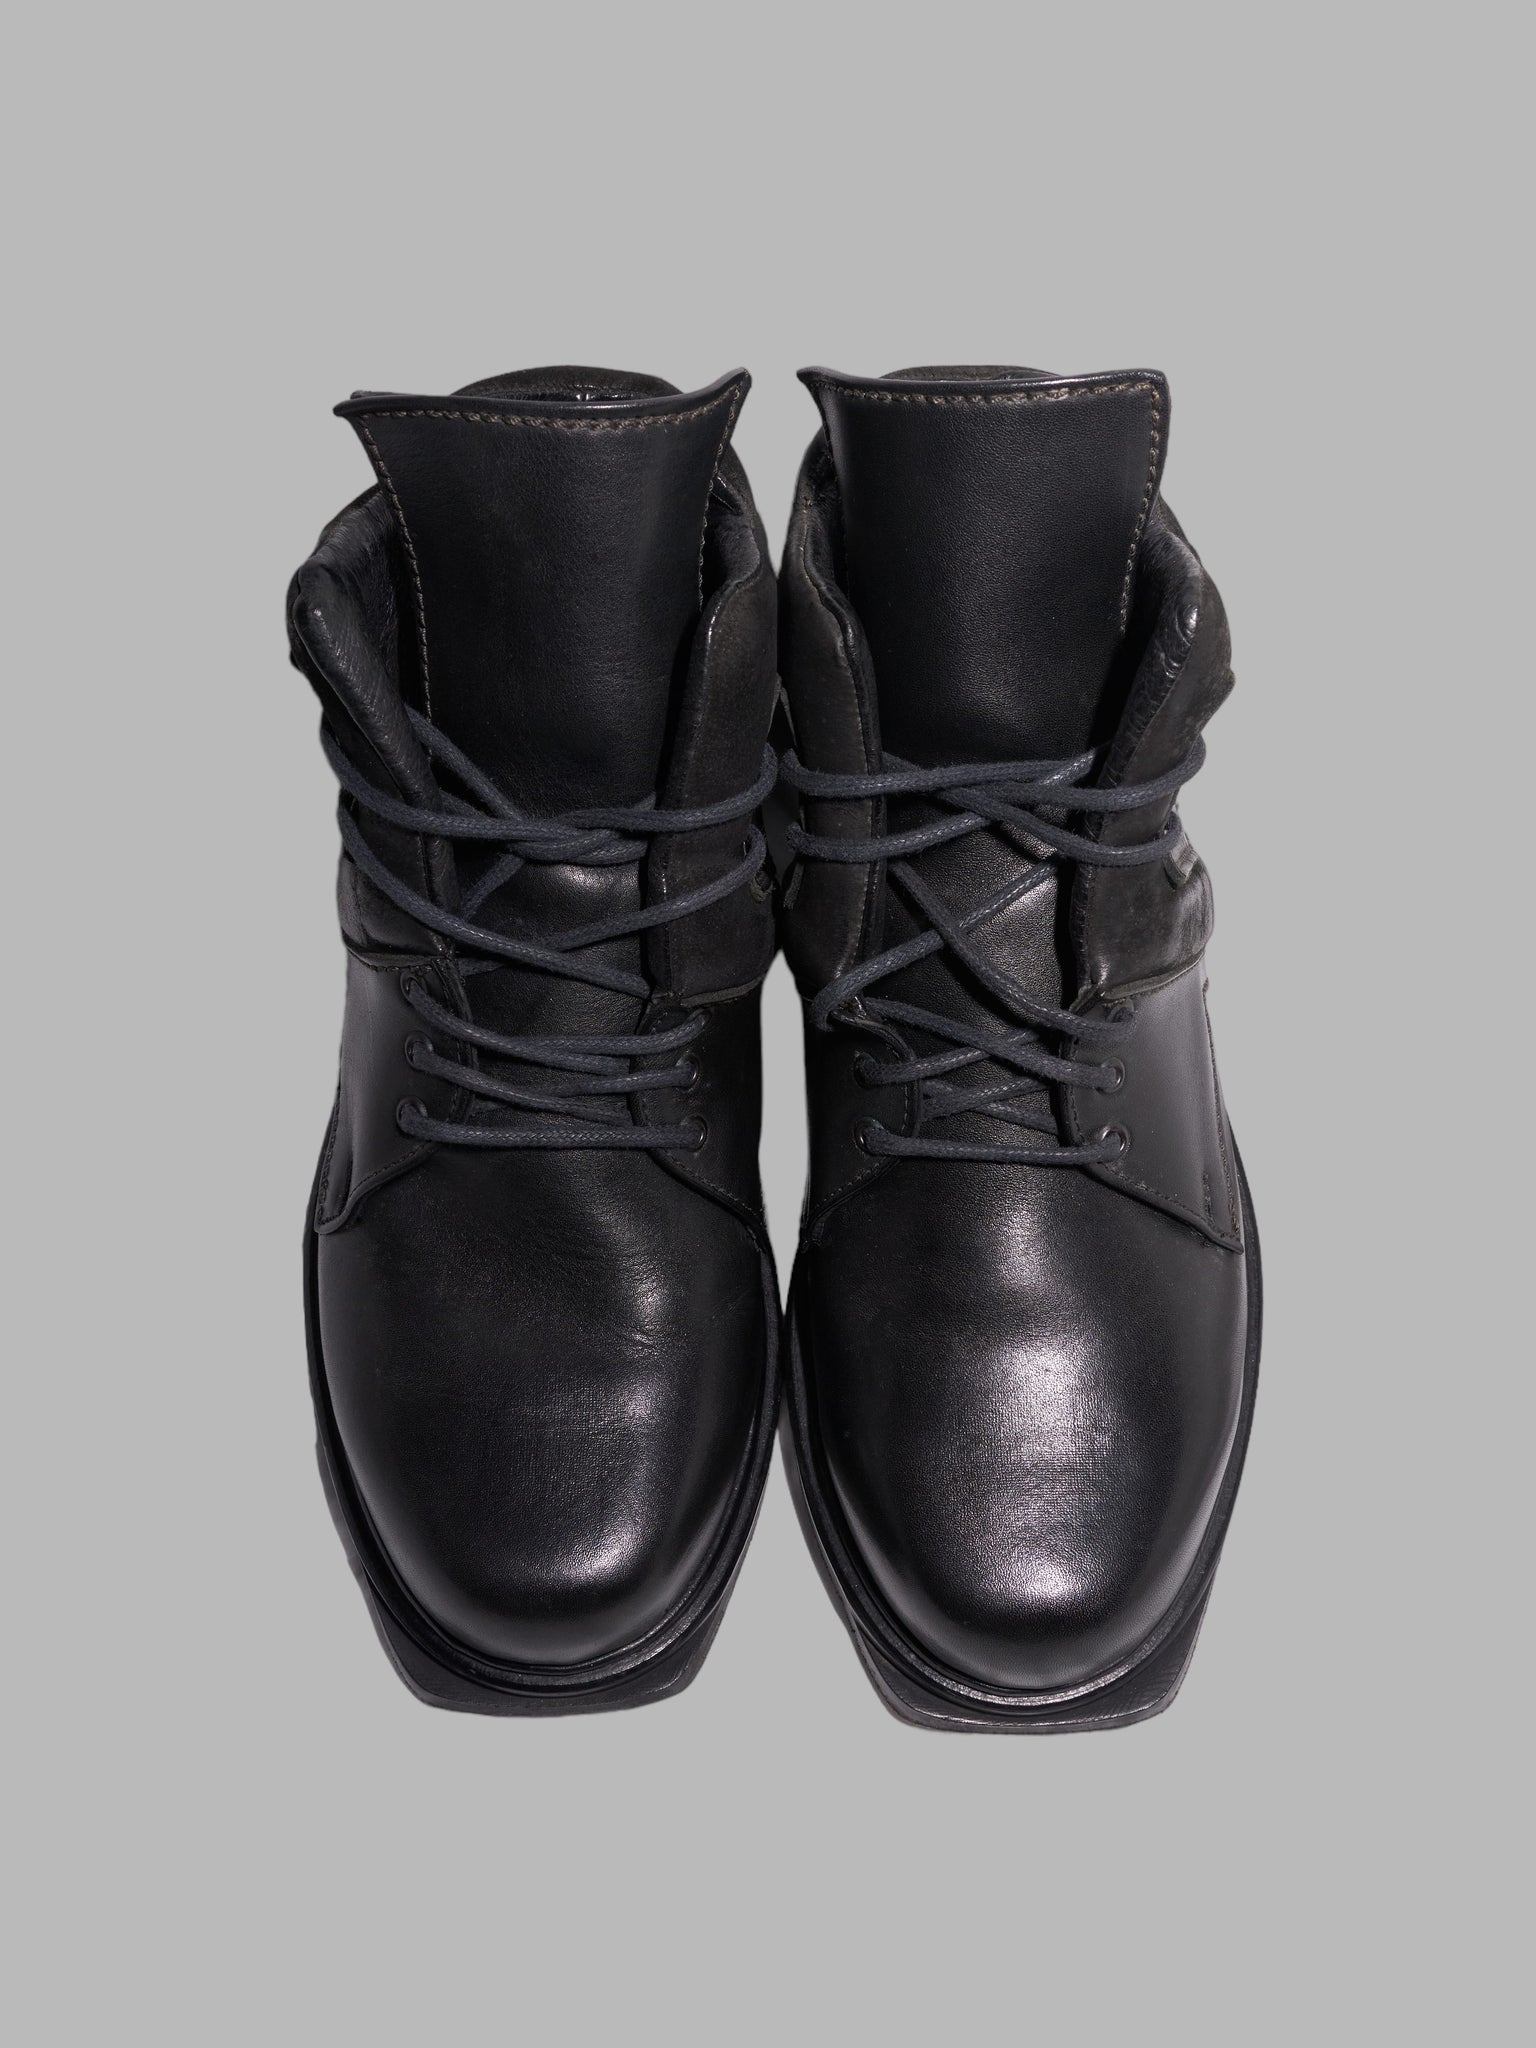 Dirk Bikkembergs 1990s black leather chunky sole square toe boots - size 40 41